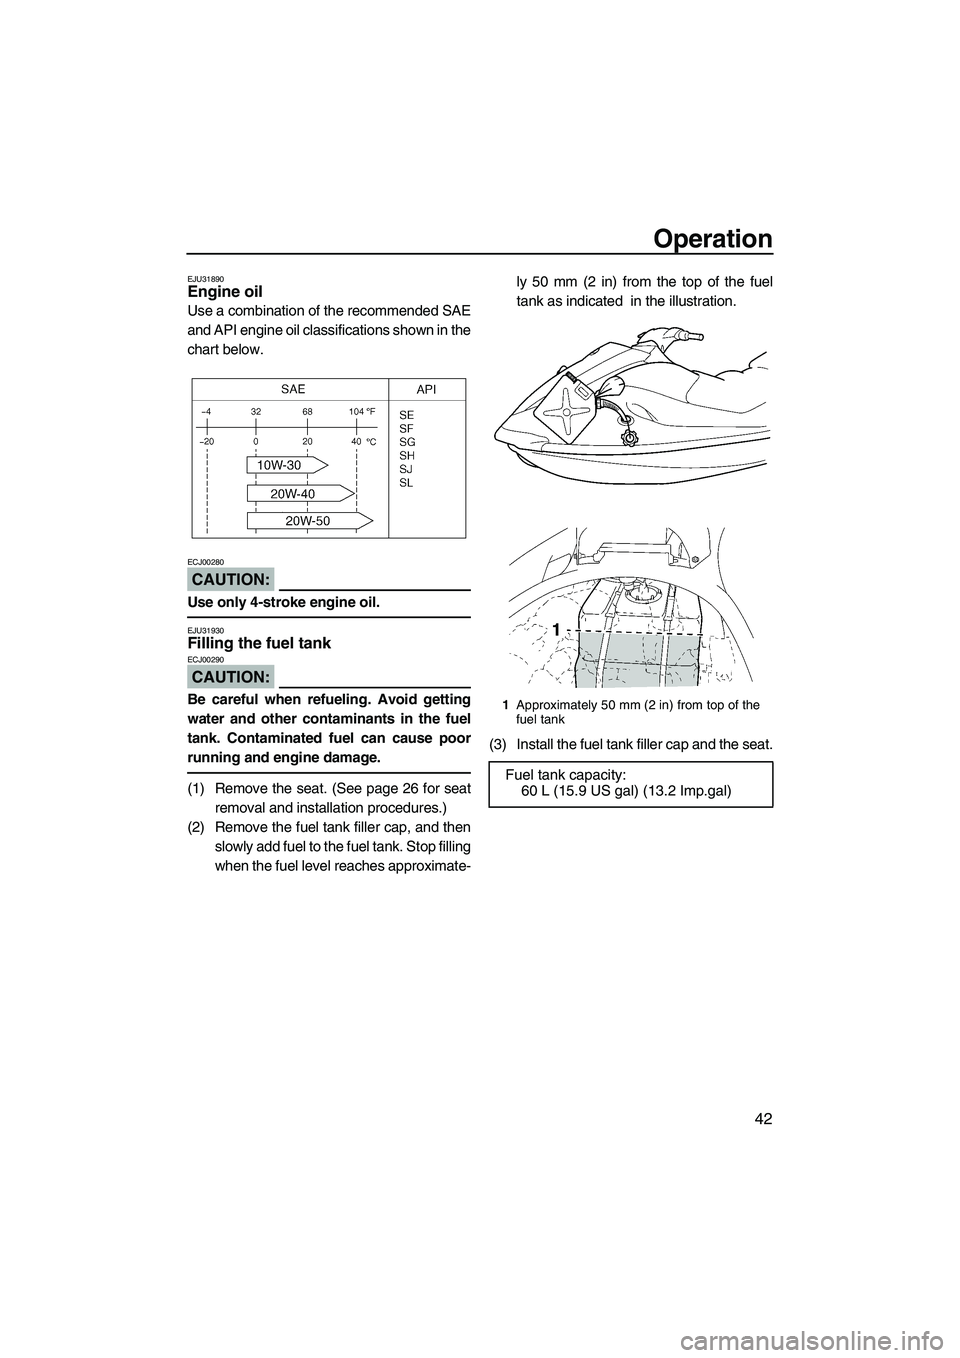 YAMAHA VX SPORT 2007 Service Manual Operation
42
EJU31890Engine oil 
Use a combination of the recommended SAE
and API engine oil classifications shown in the
chart below.
CAUTION:
ECJ00280
Use only 4-stroke engine oil.
EJU31930Filling t